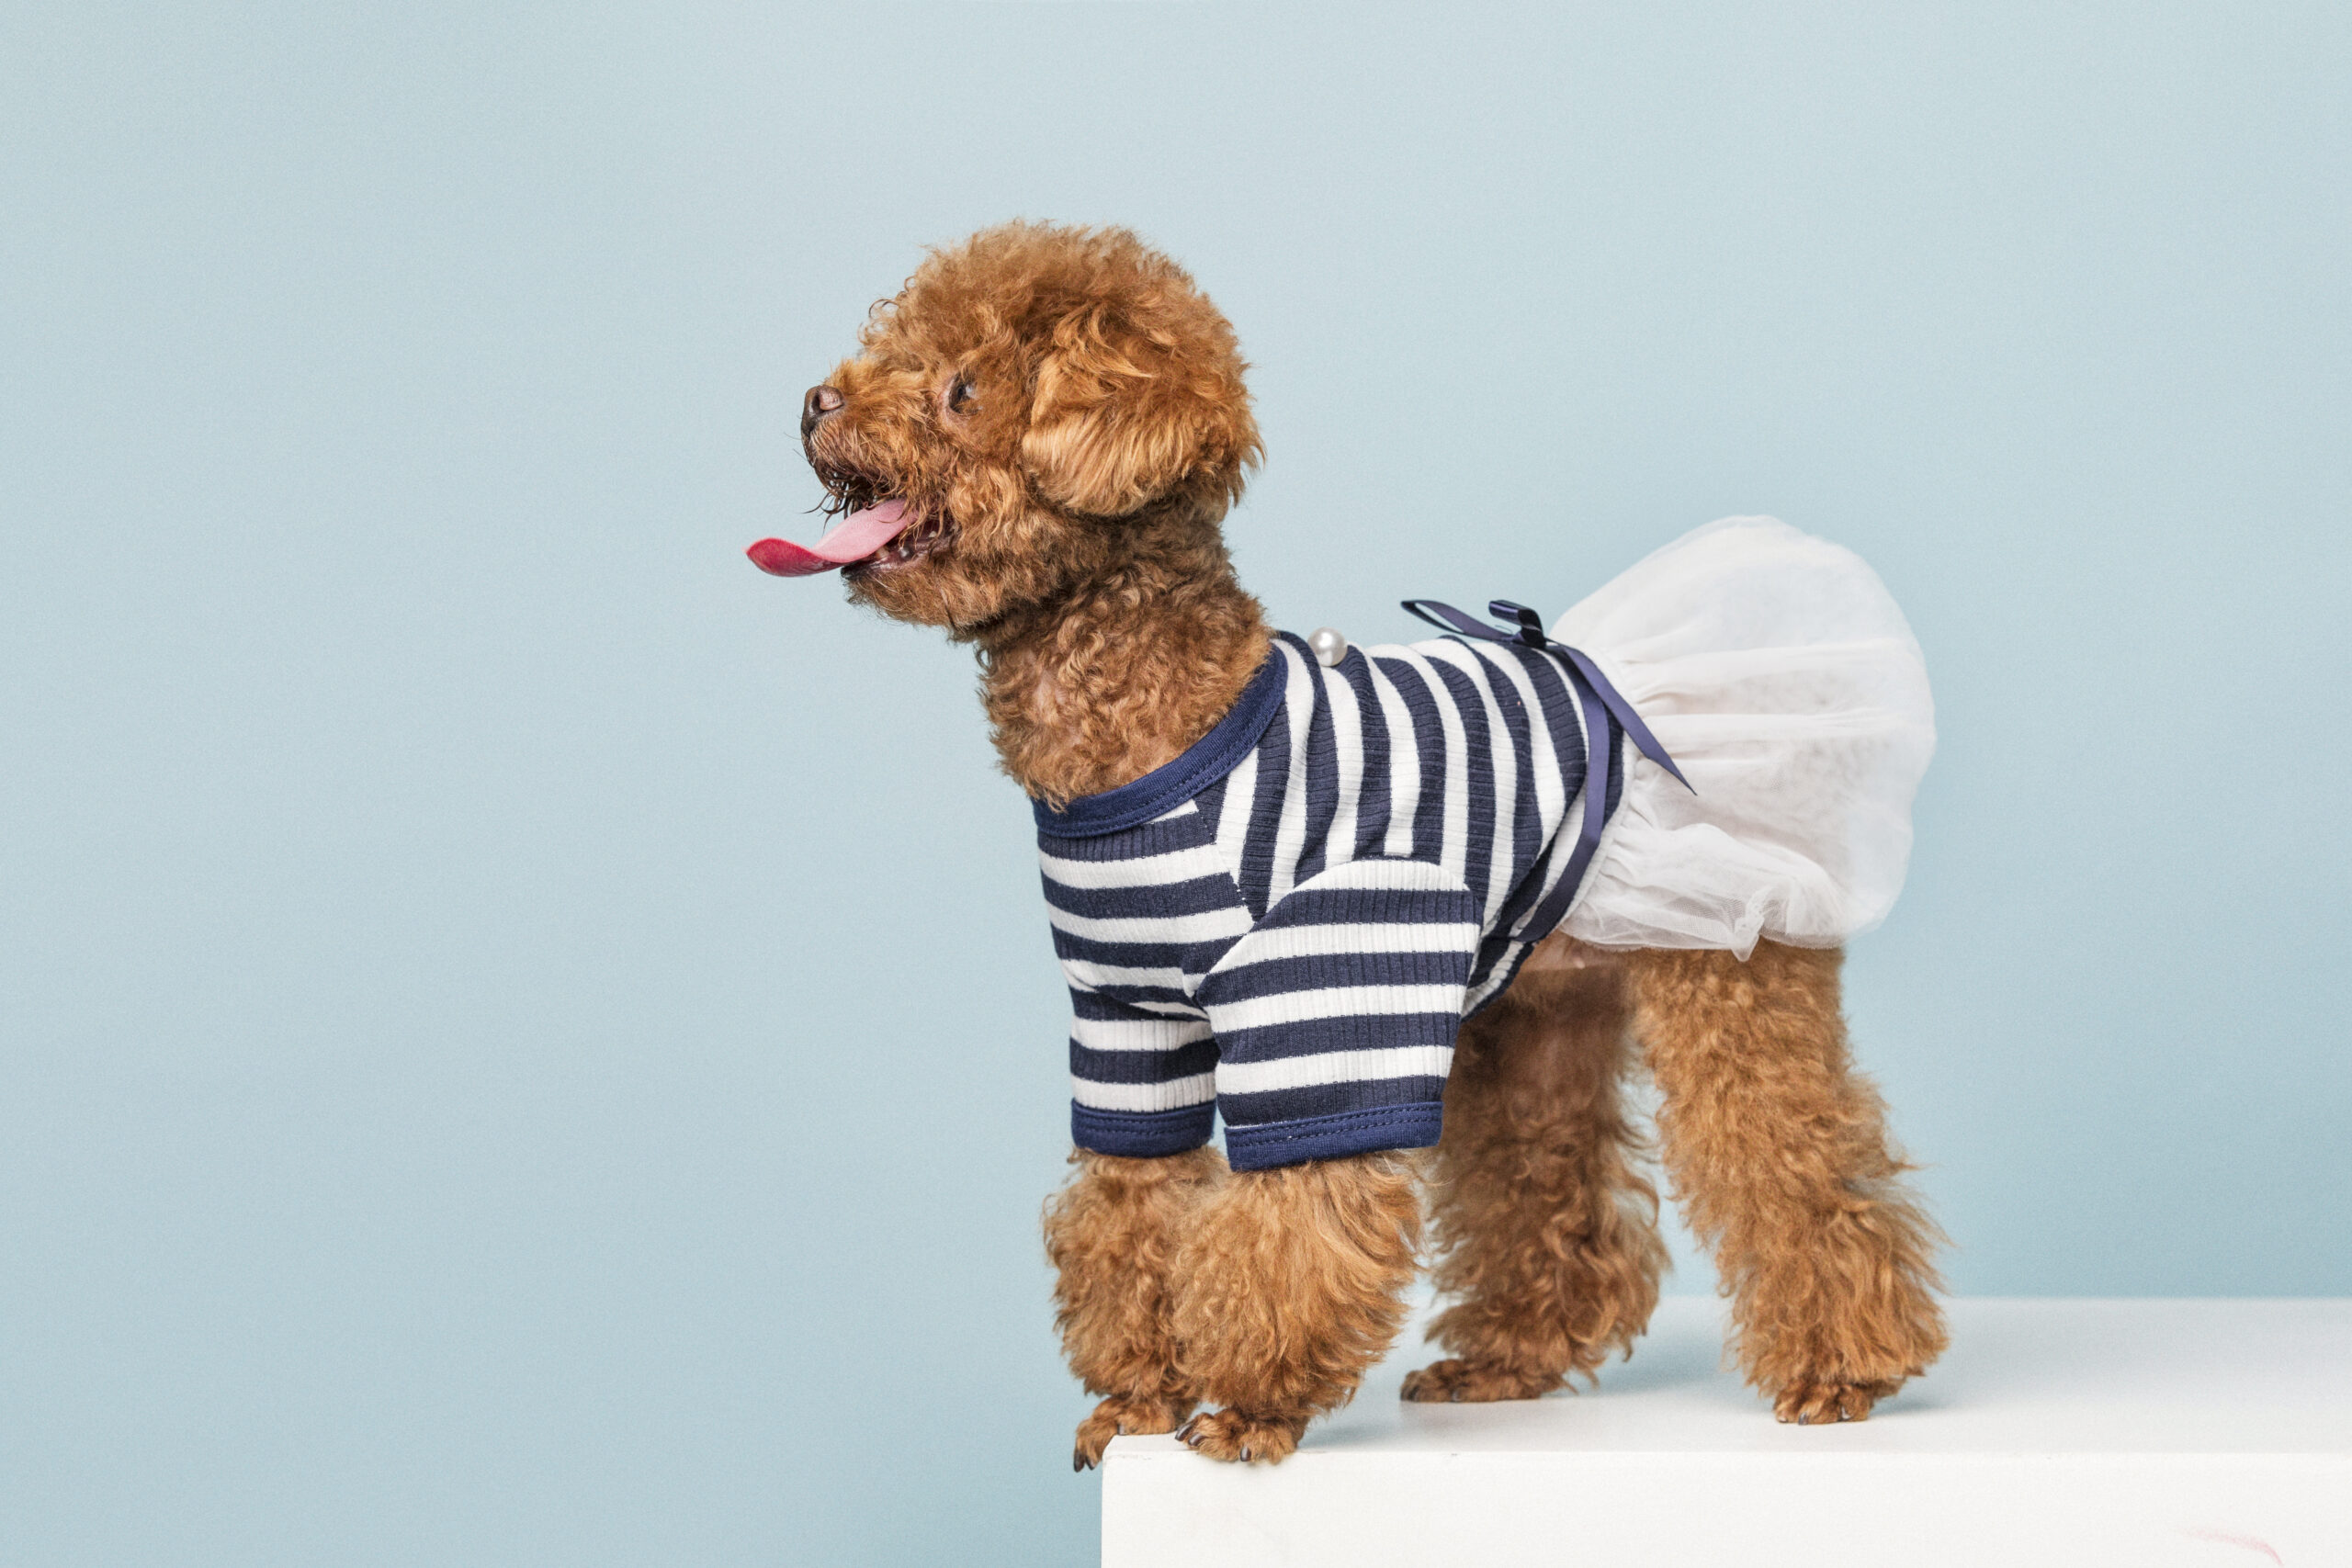 Adorable little poodle with a cute striped shirt and a white skirt on a blue background